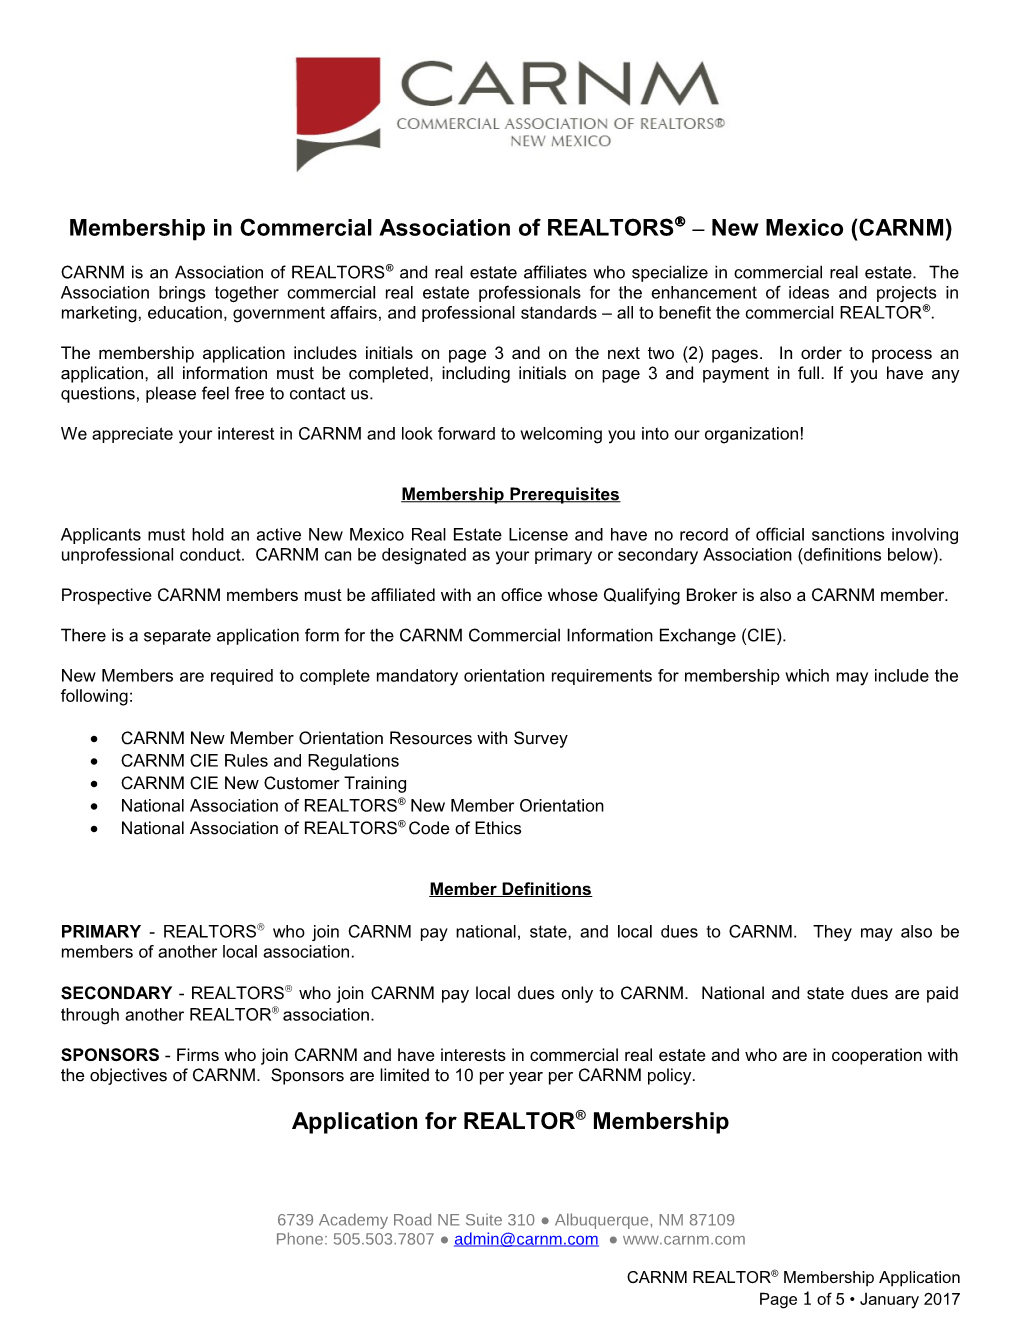 Membership in Commercial Association of REALTORS New Mexico (CARNM)